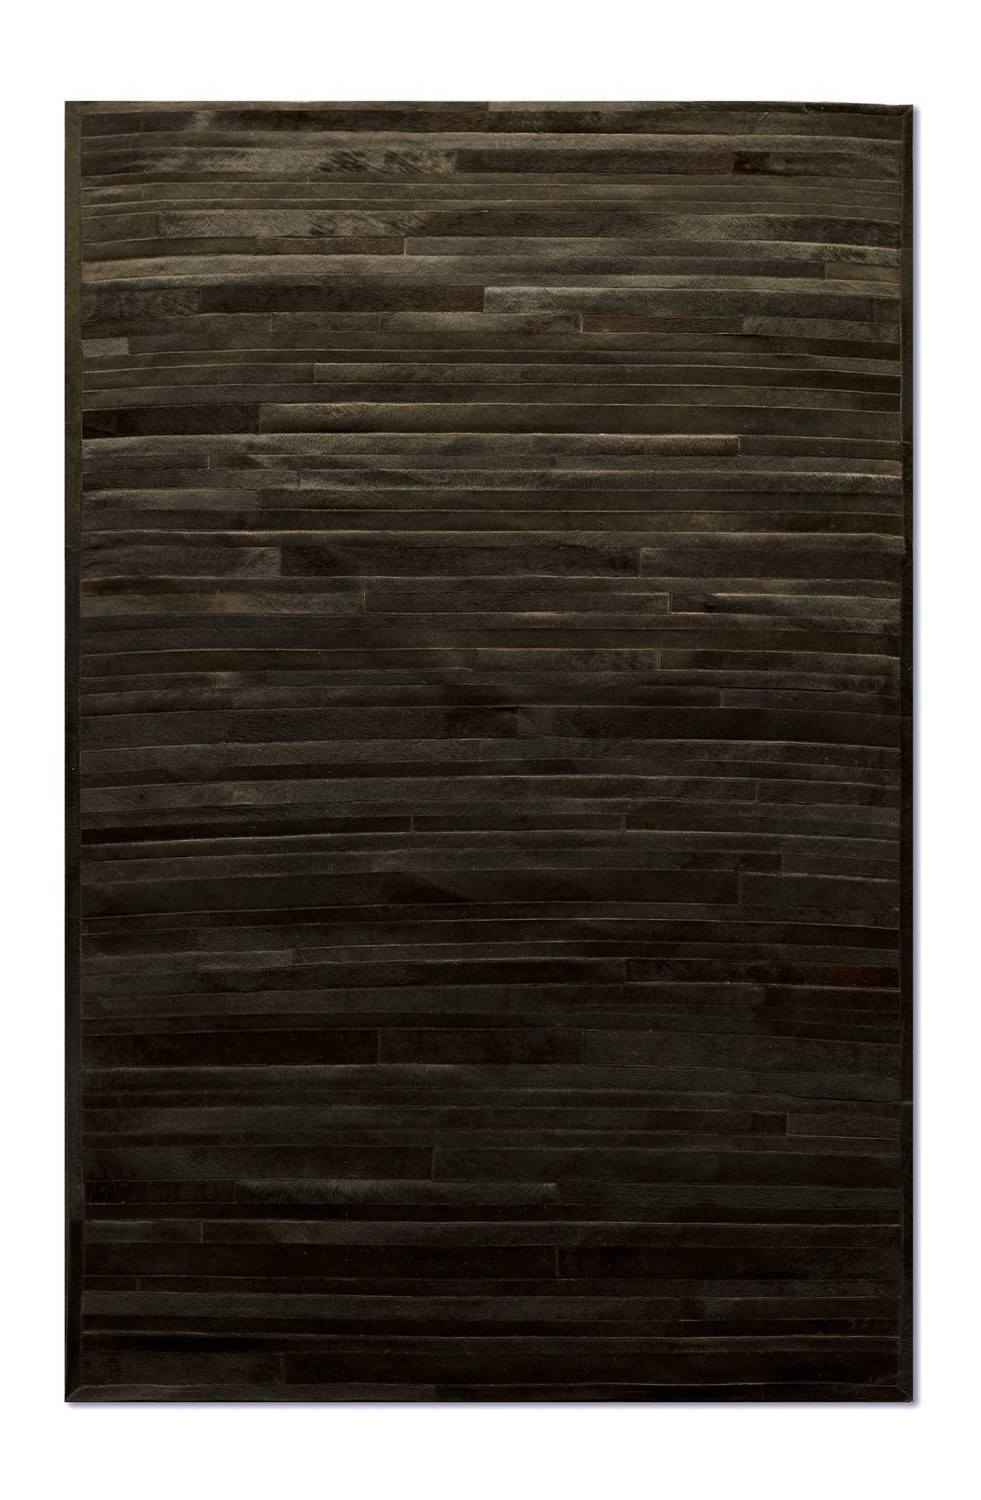 96" x 120" Chocolate Linear, Cowhide Stitched - Area Rug